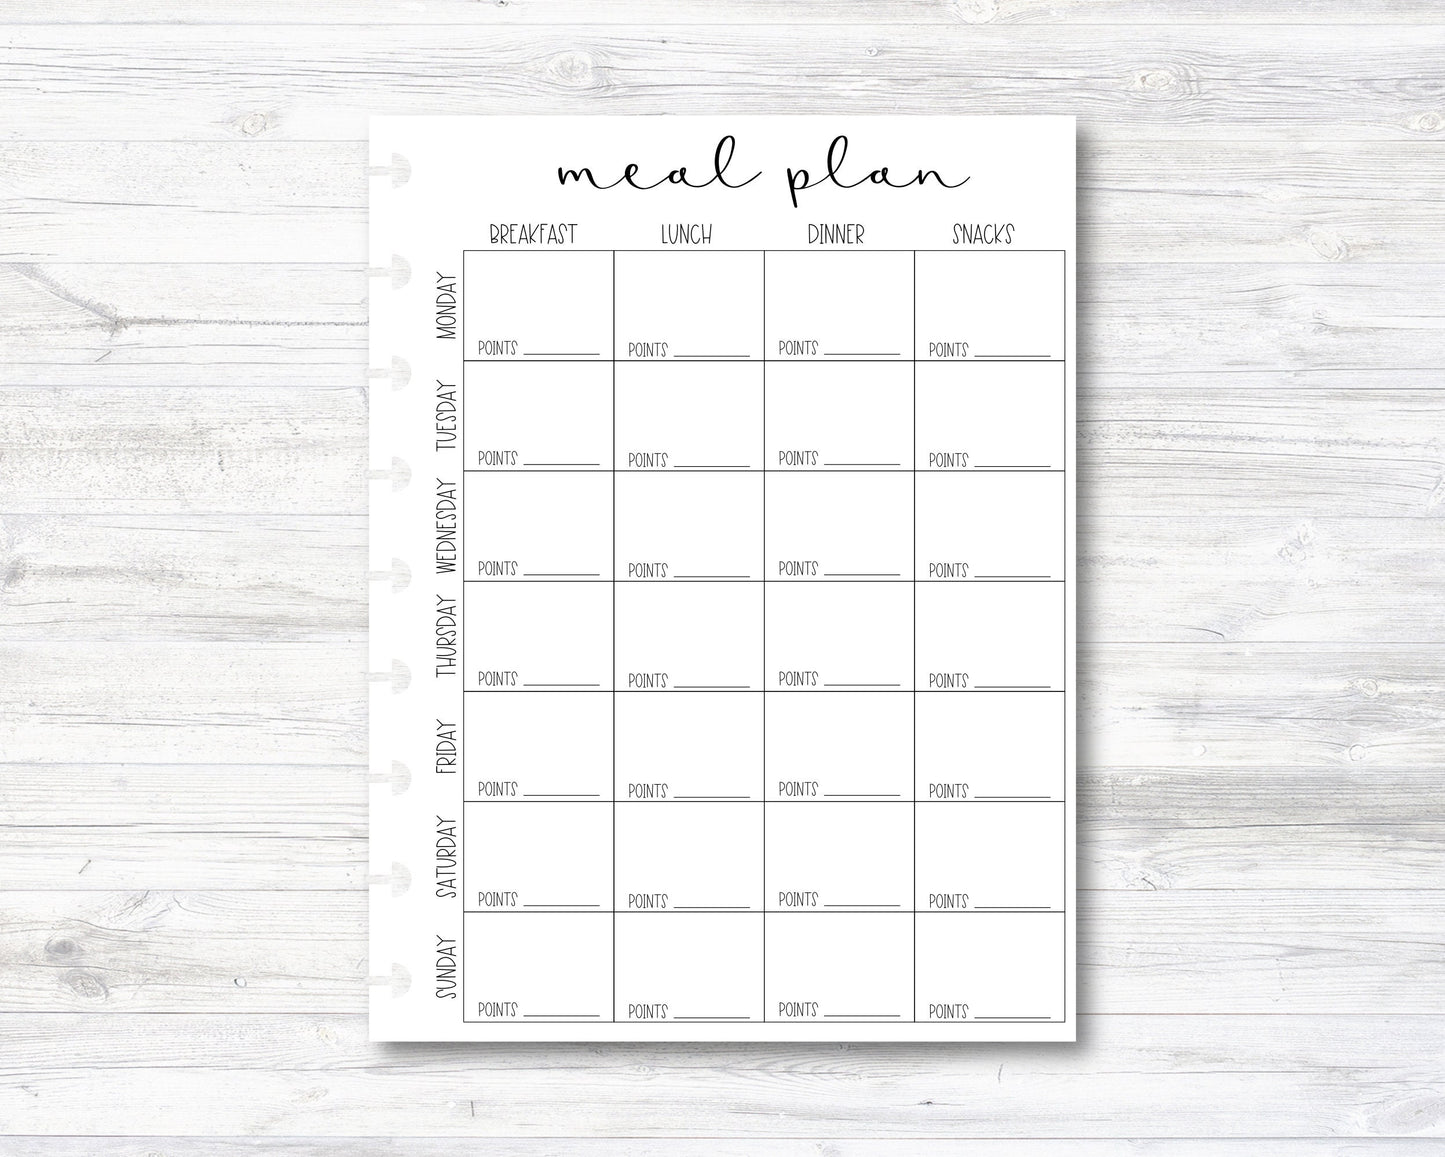 Weekly Meal Plan with Points Happy Planner Insert - Classic Size (M014)